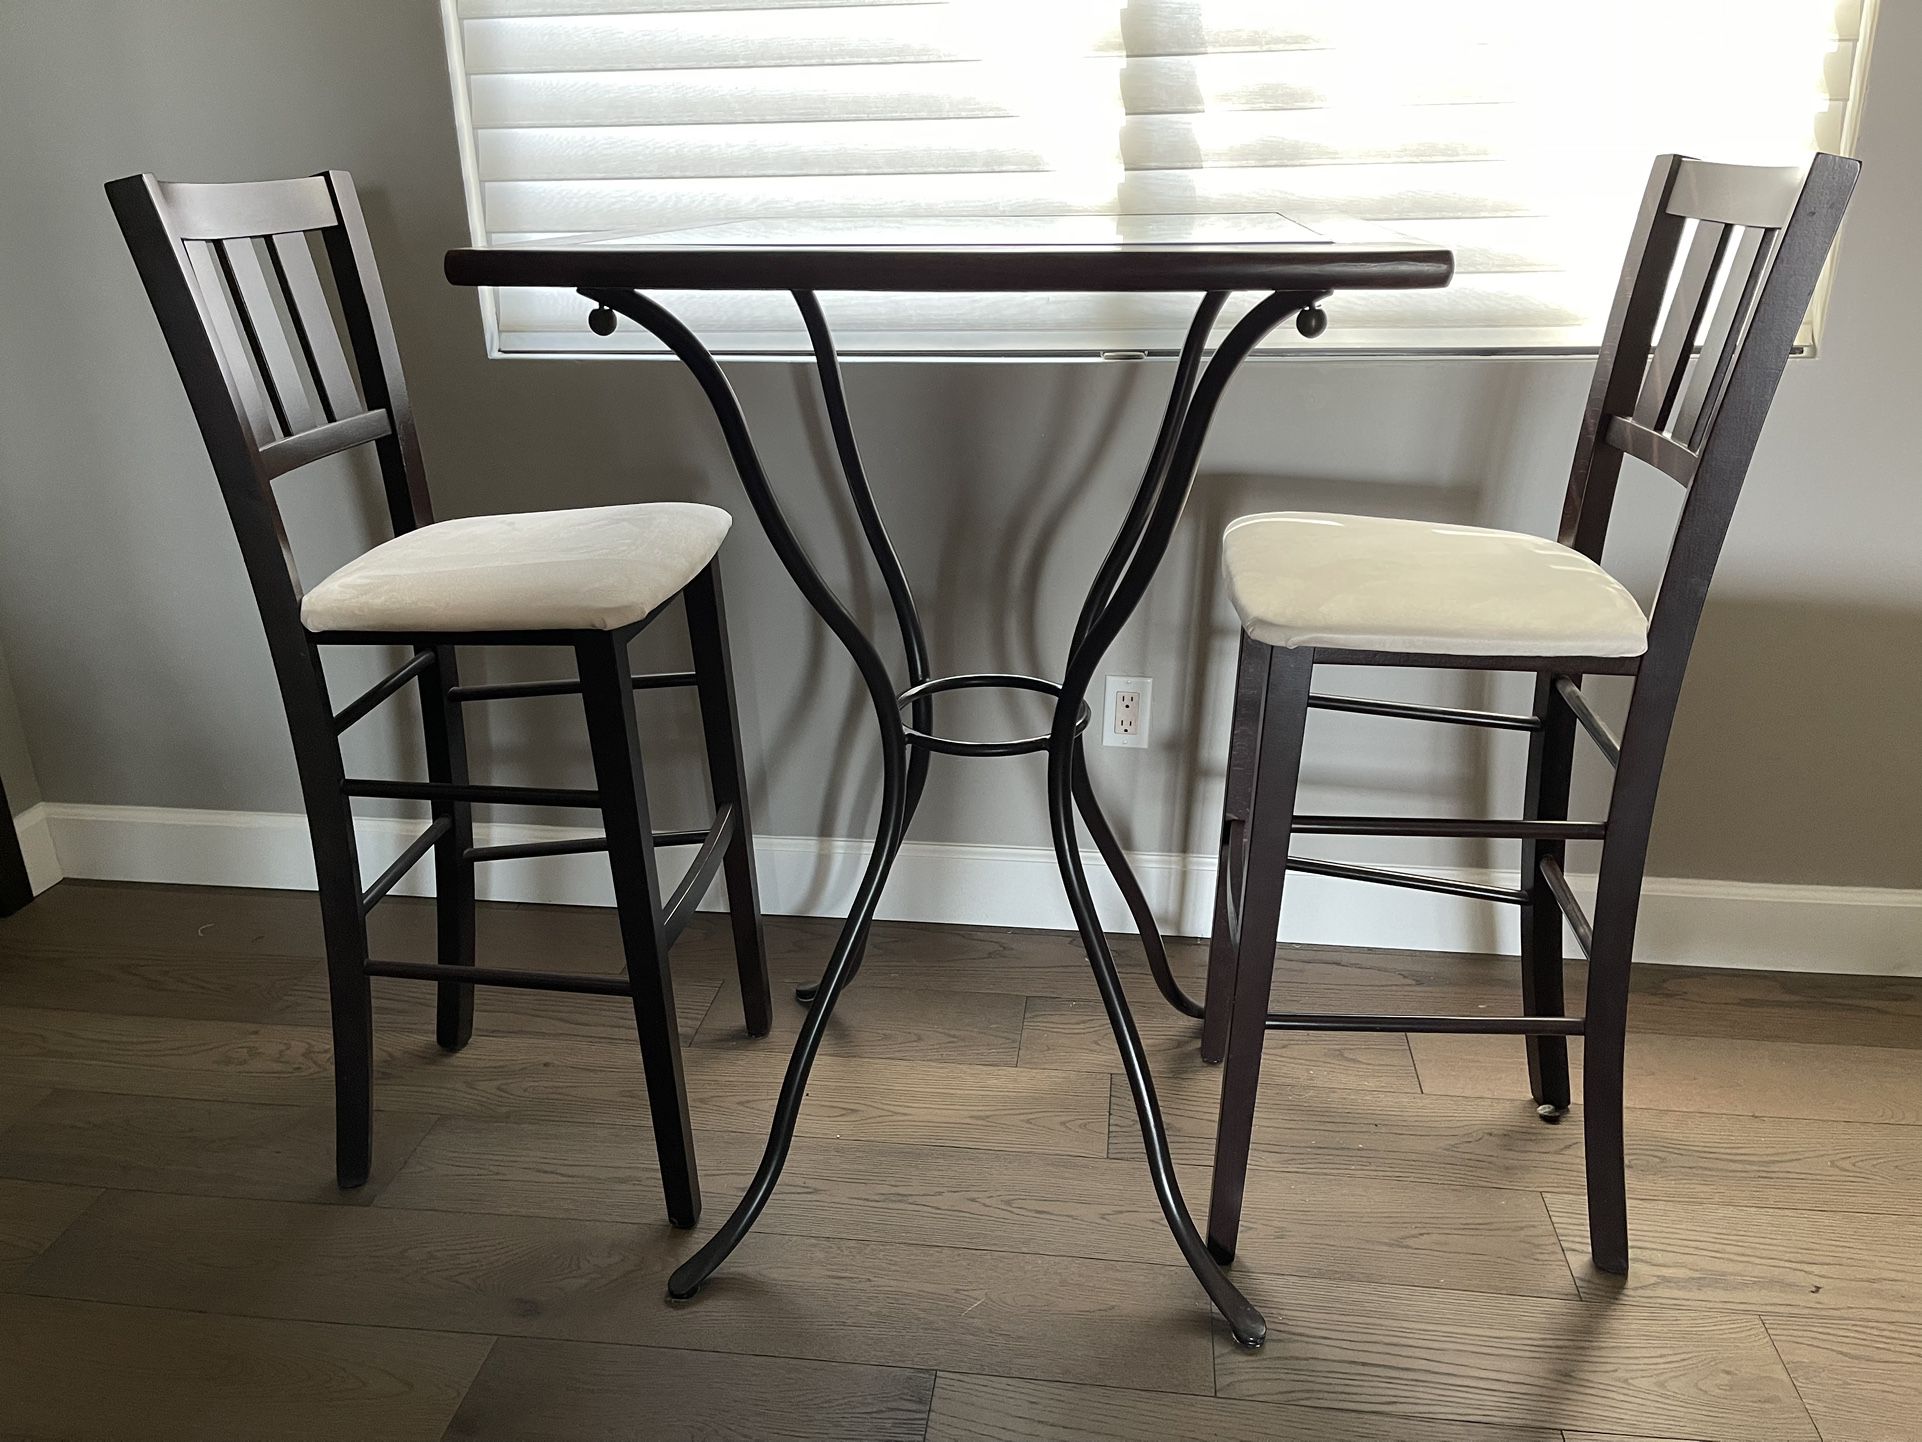 Bistro Table & 2 Chairs